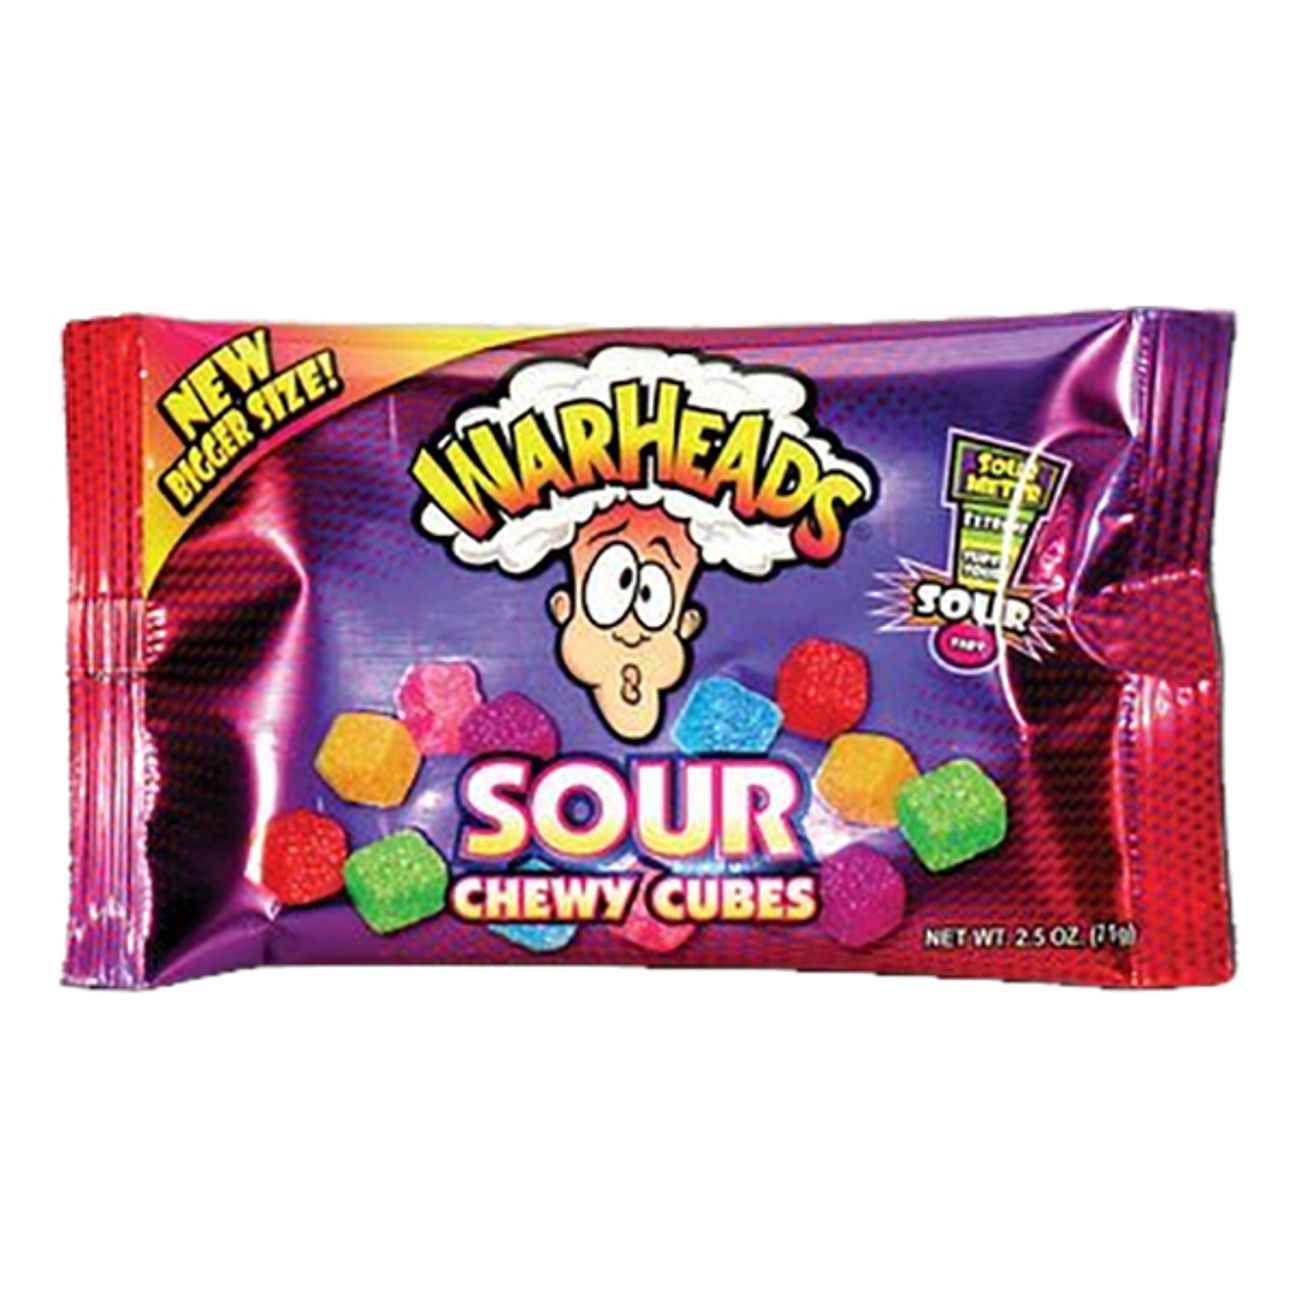 warheads-sour-chewy-cubes-78571-1